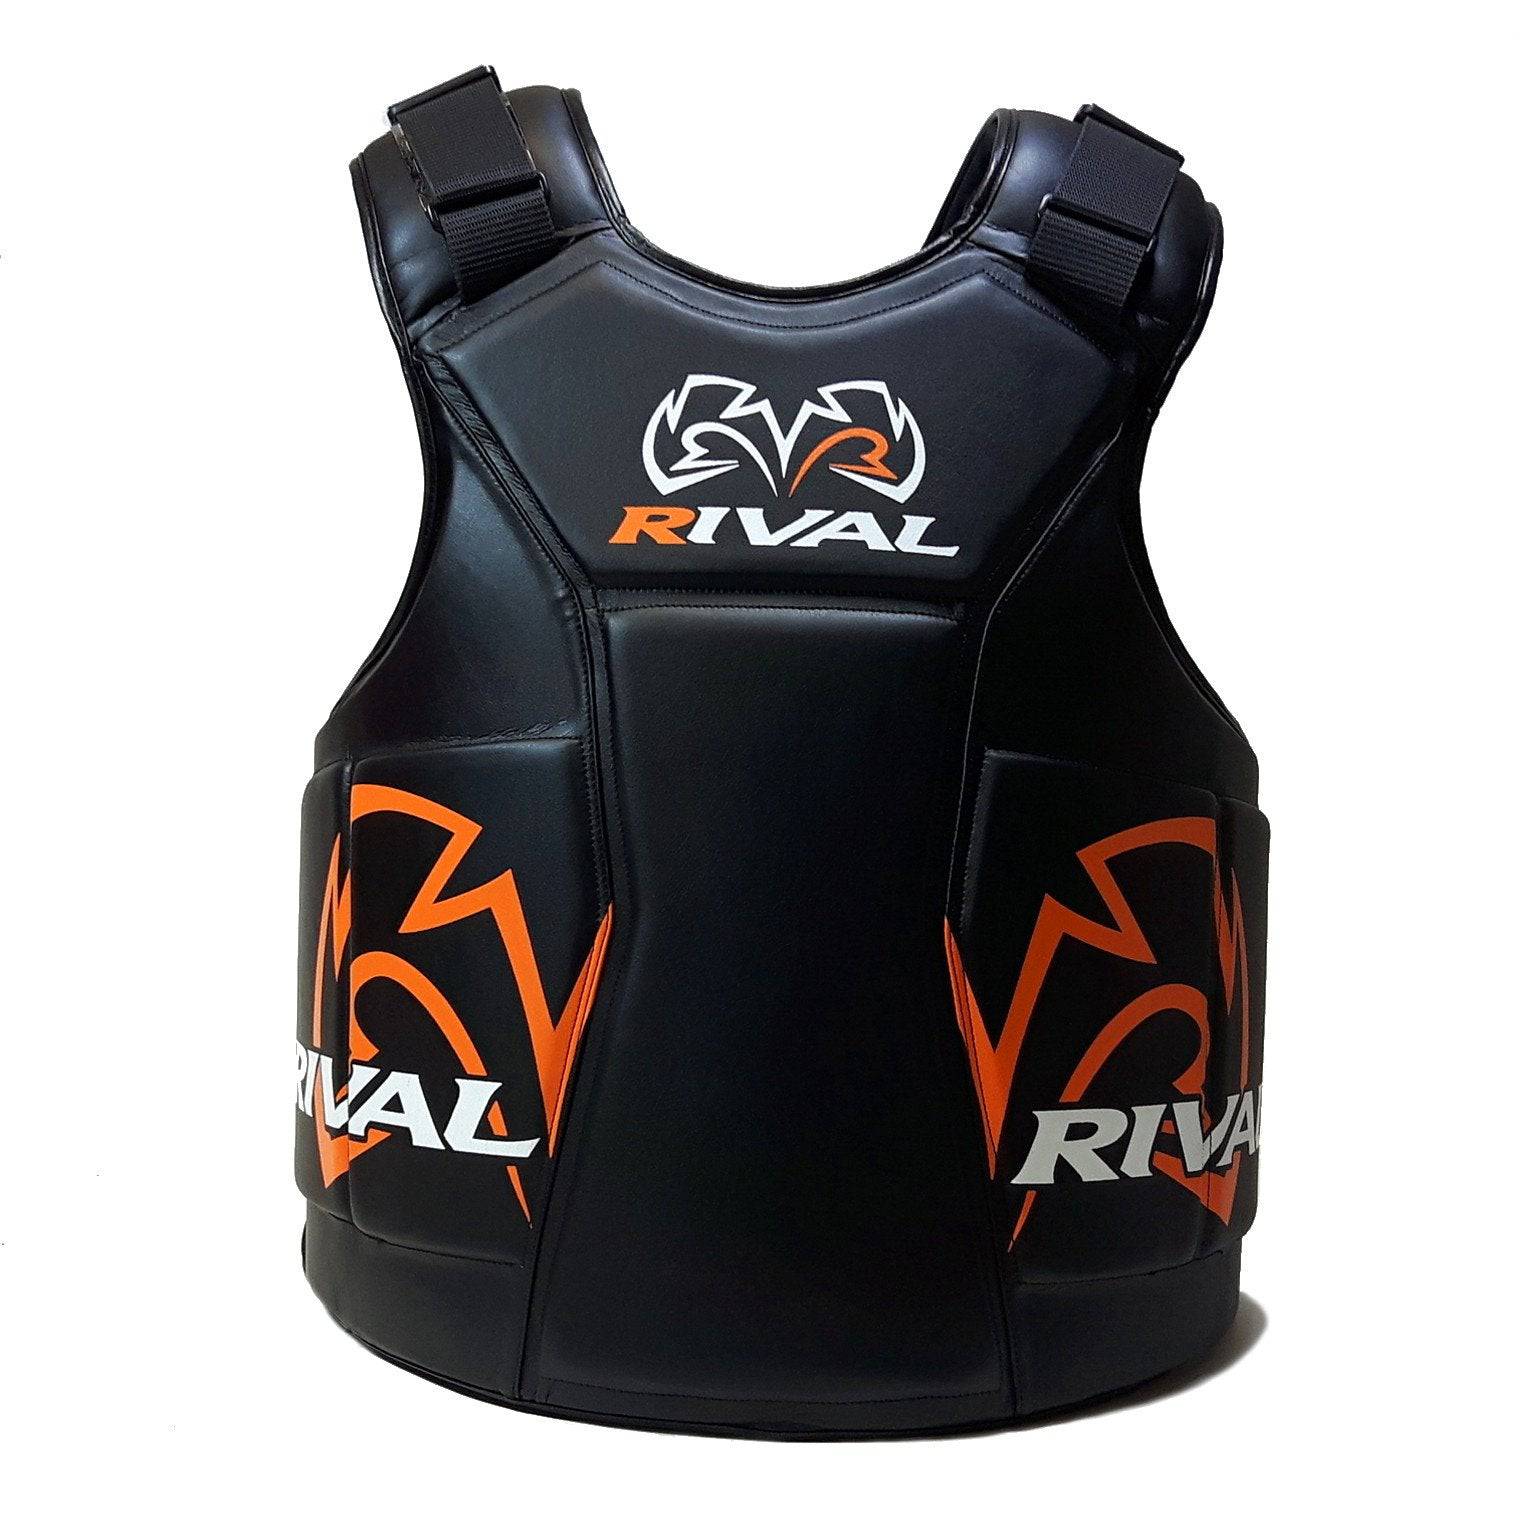 Rival | Body Protector - The Shield - XTC Fitness - Exercise Equipment Superstore - Canada - Body Protector